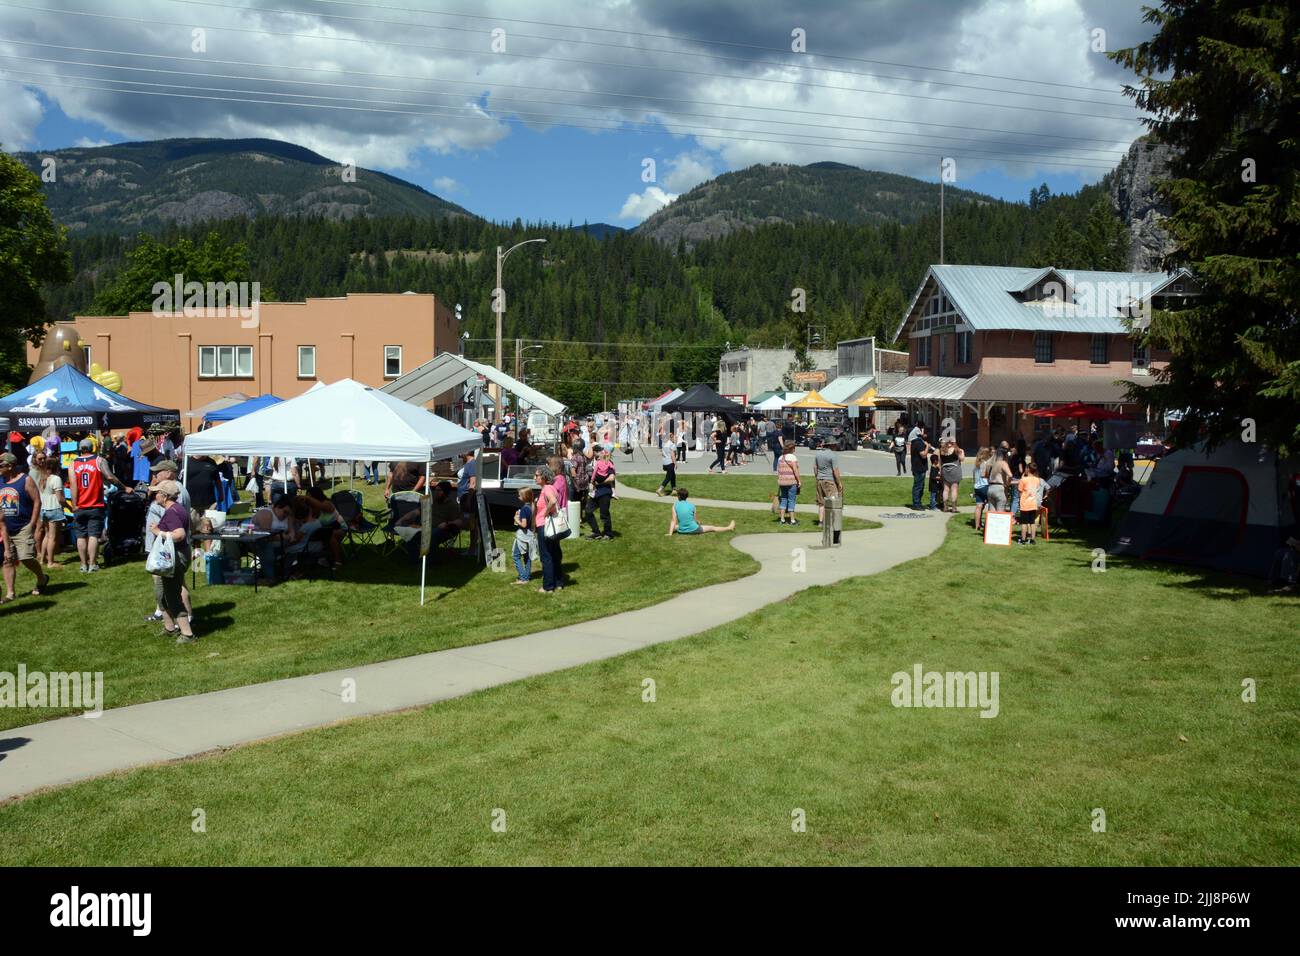 Vendors and visitors on the grounds of the Metaline Falls Bigfoot Festival in Metaline Falls, Washington State, USA. Stock Photo